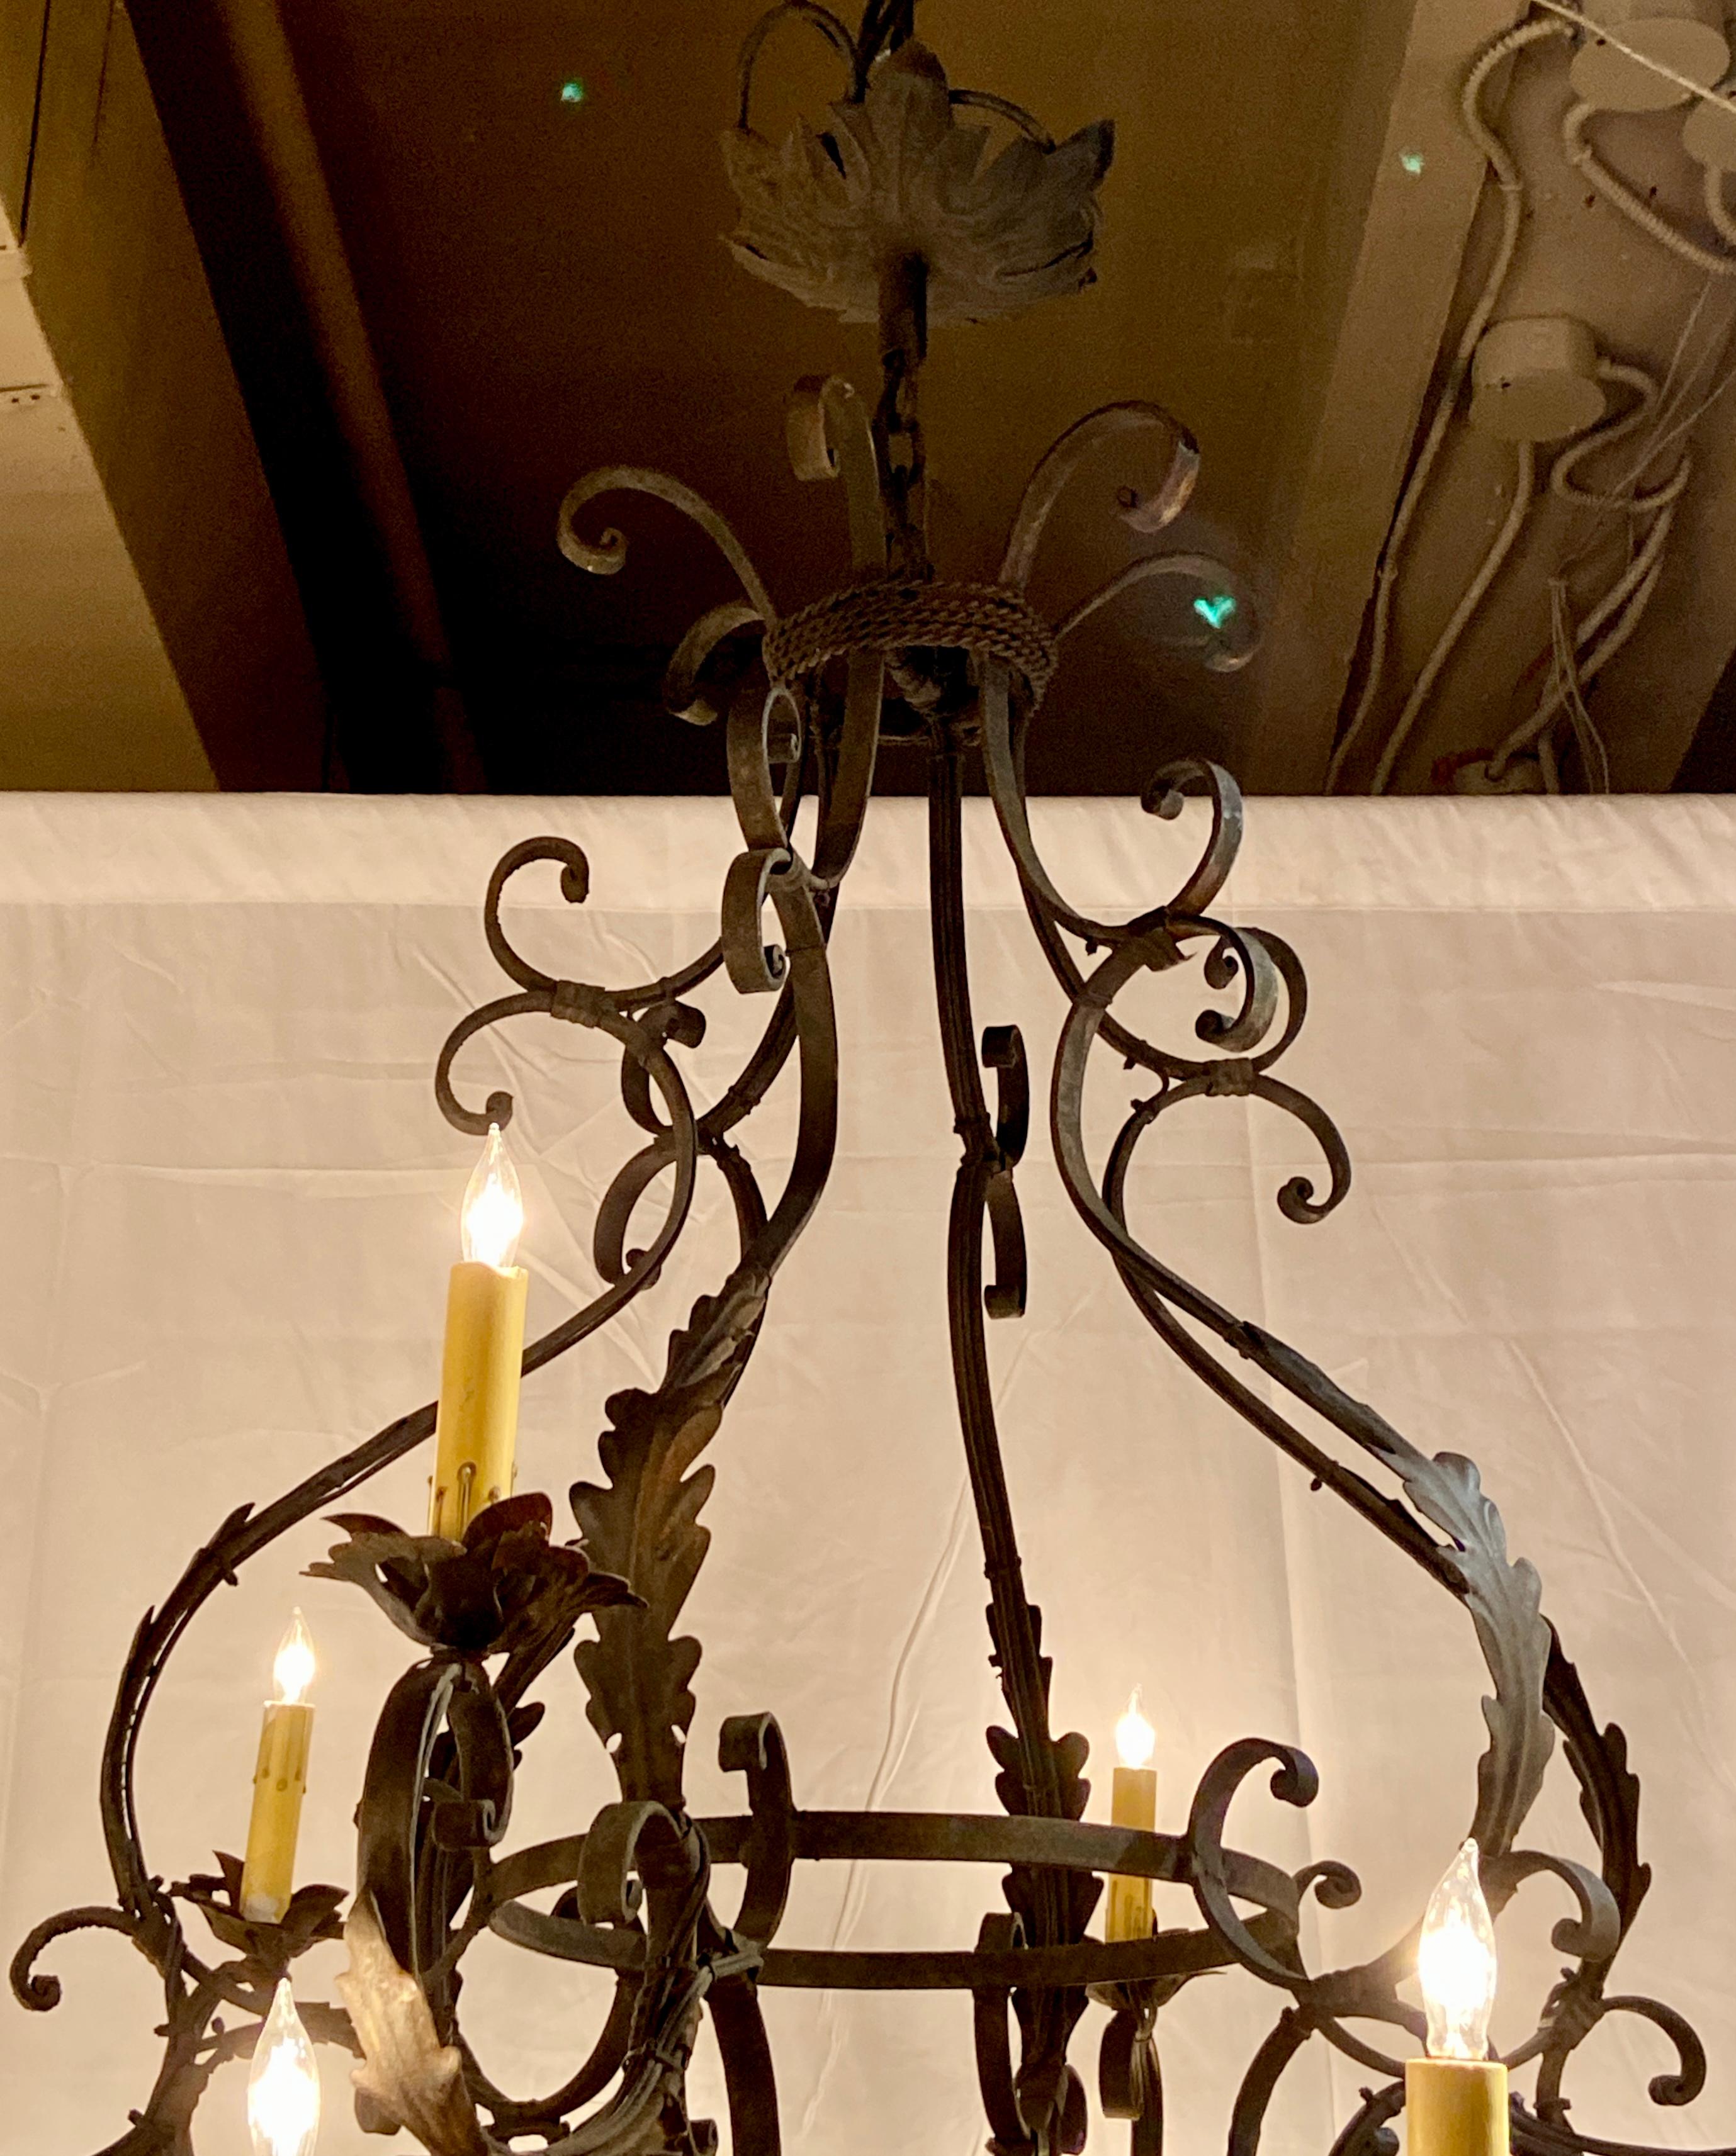 A nicely rendered wrought iron chandelier with plenty of light (18 lights) and appealing detail with the leaf motif and grape clusters.